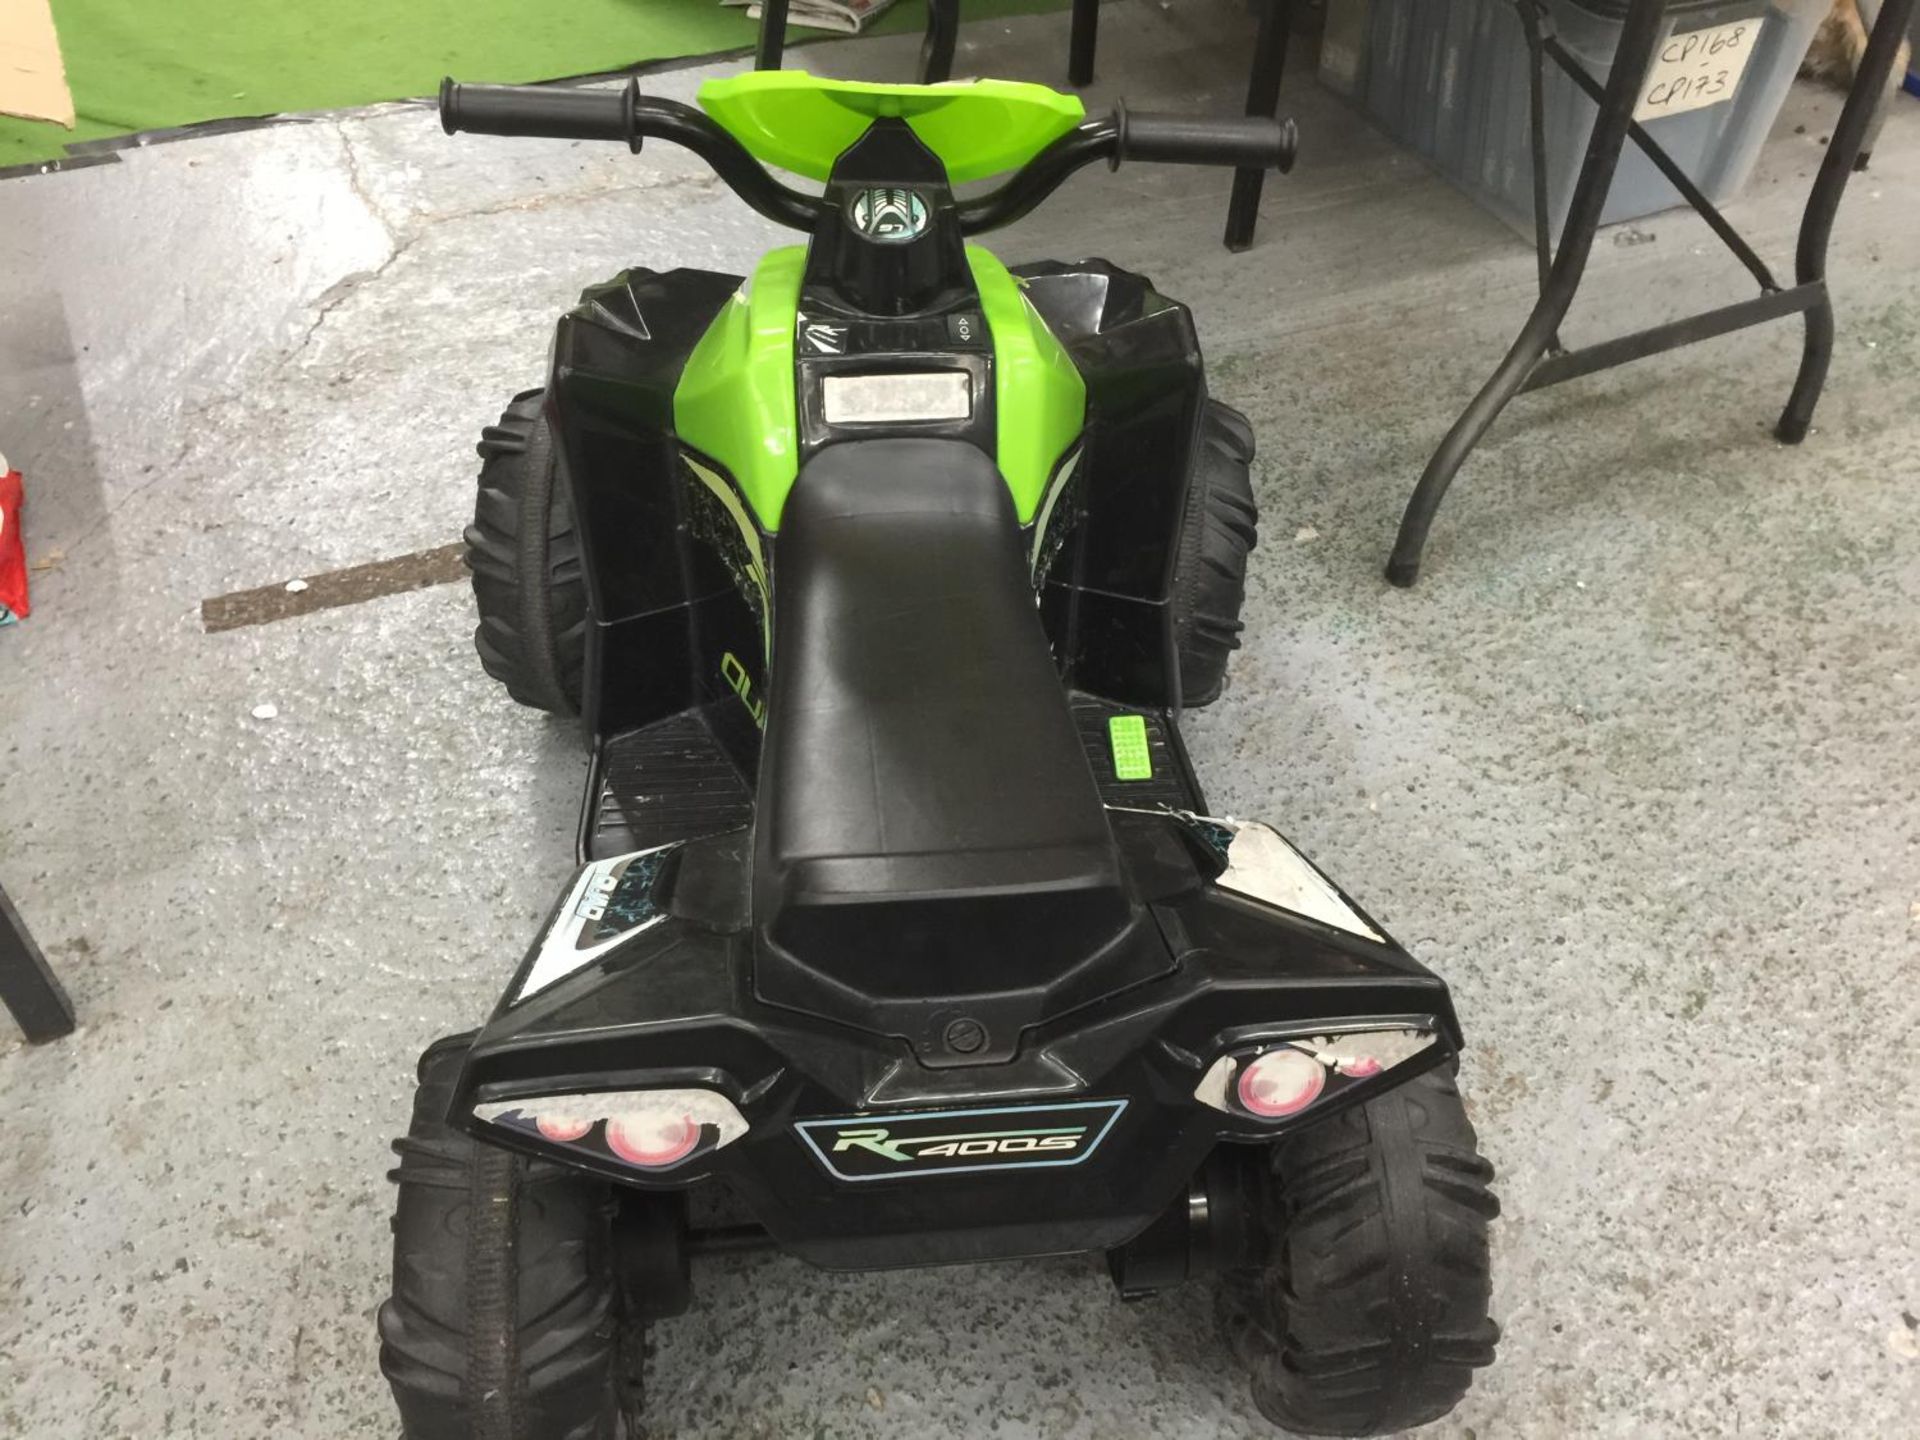 A CHILDREN'S ELECTRIC QUAD BIKE WITH CHARGER - VENDOR STATES IN WORKING ORDER AND VERY LITTLE USE, - Image 3 of 3